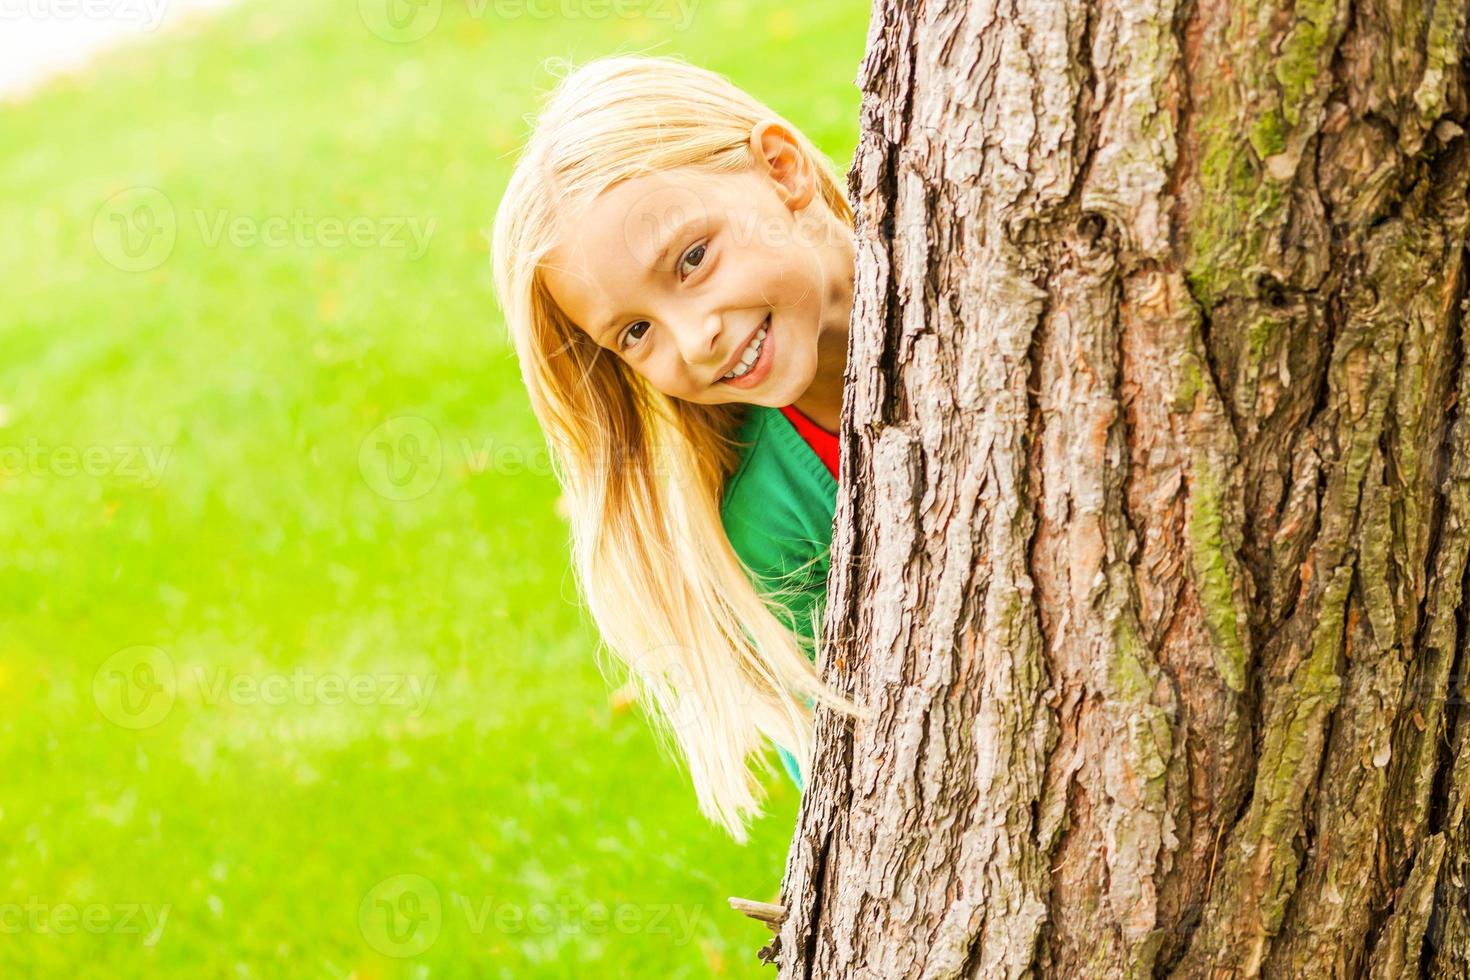 Feeling playful. Cute little girl looking out of the tree and smiling while standing outdoors photo